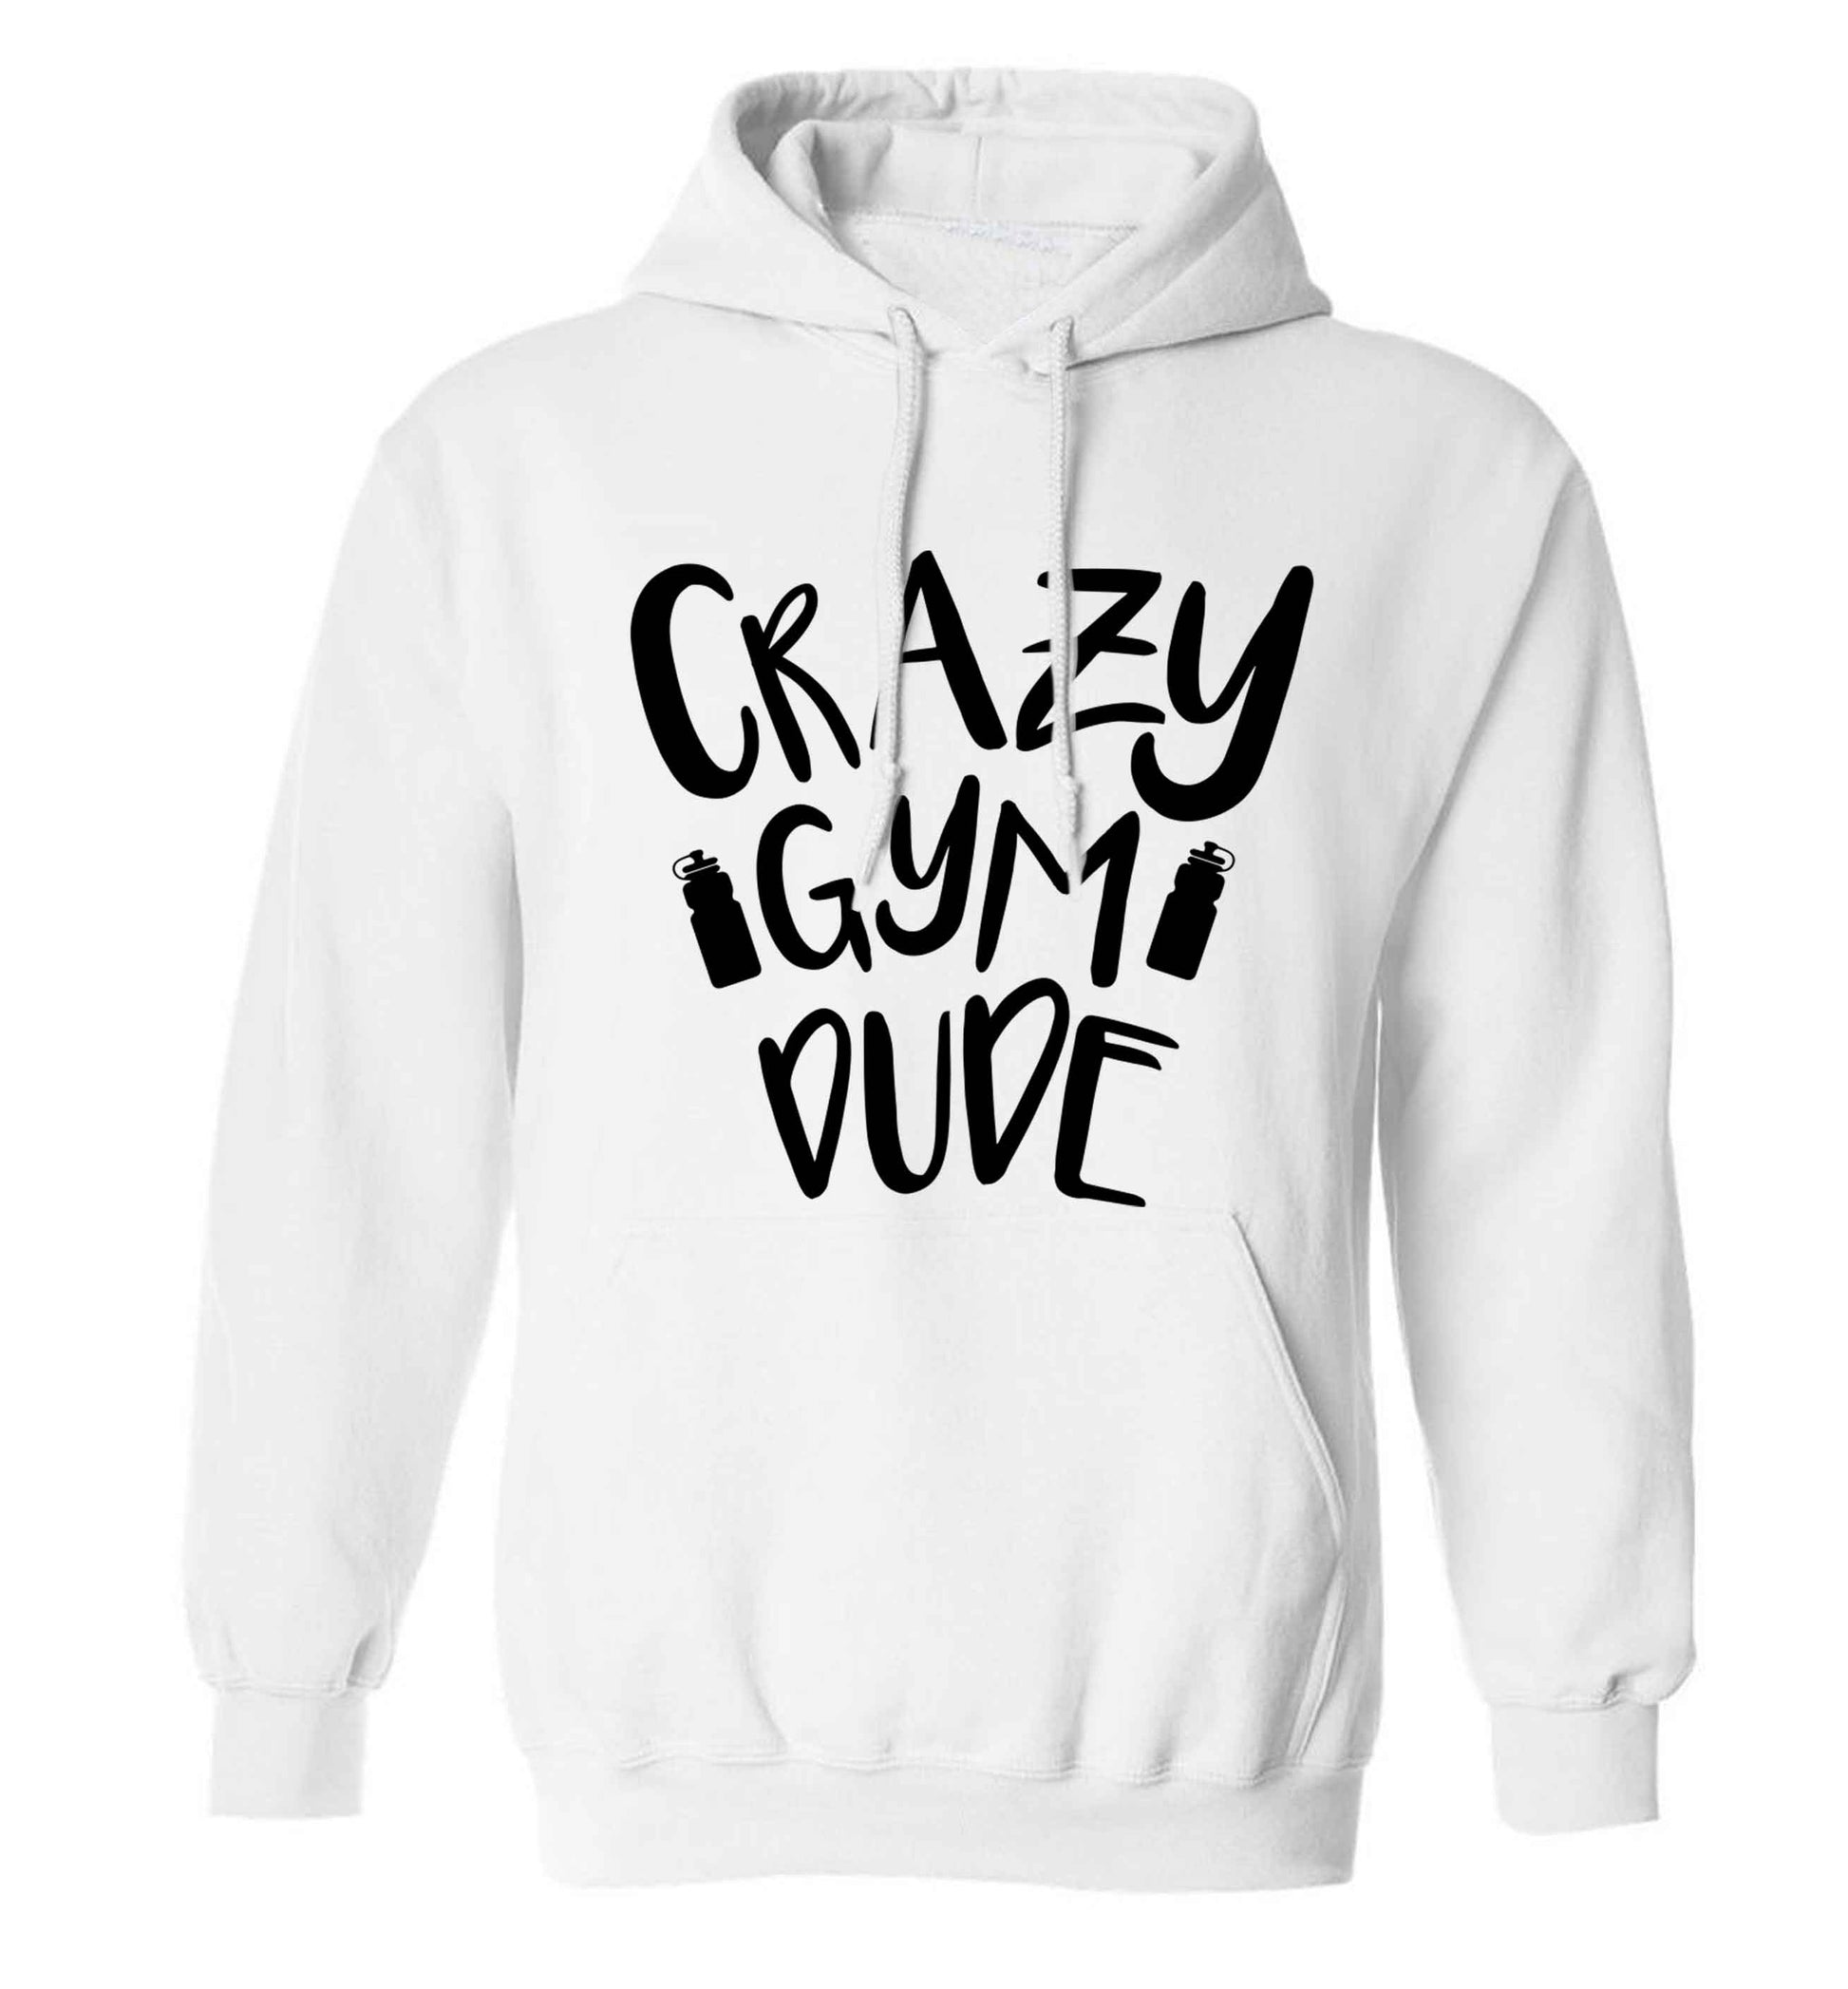 Crazy gym dude adults unisex white hoodie 2XL